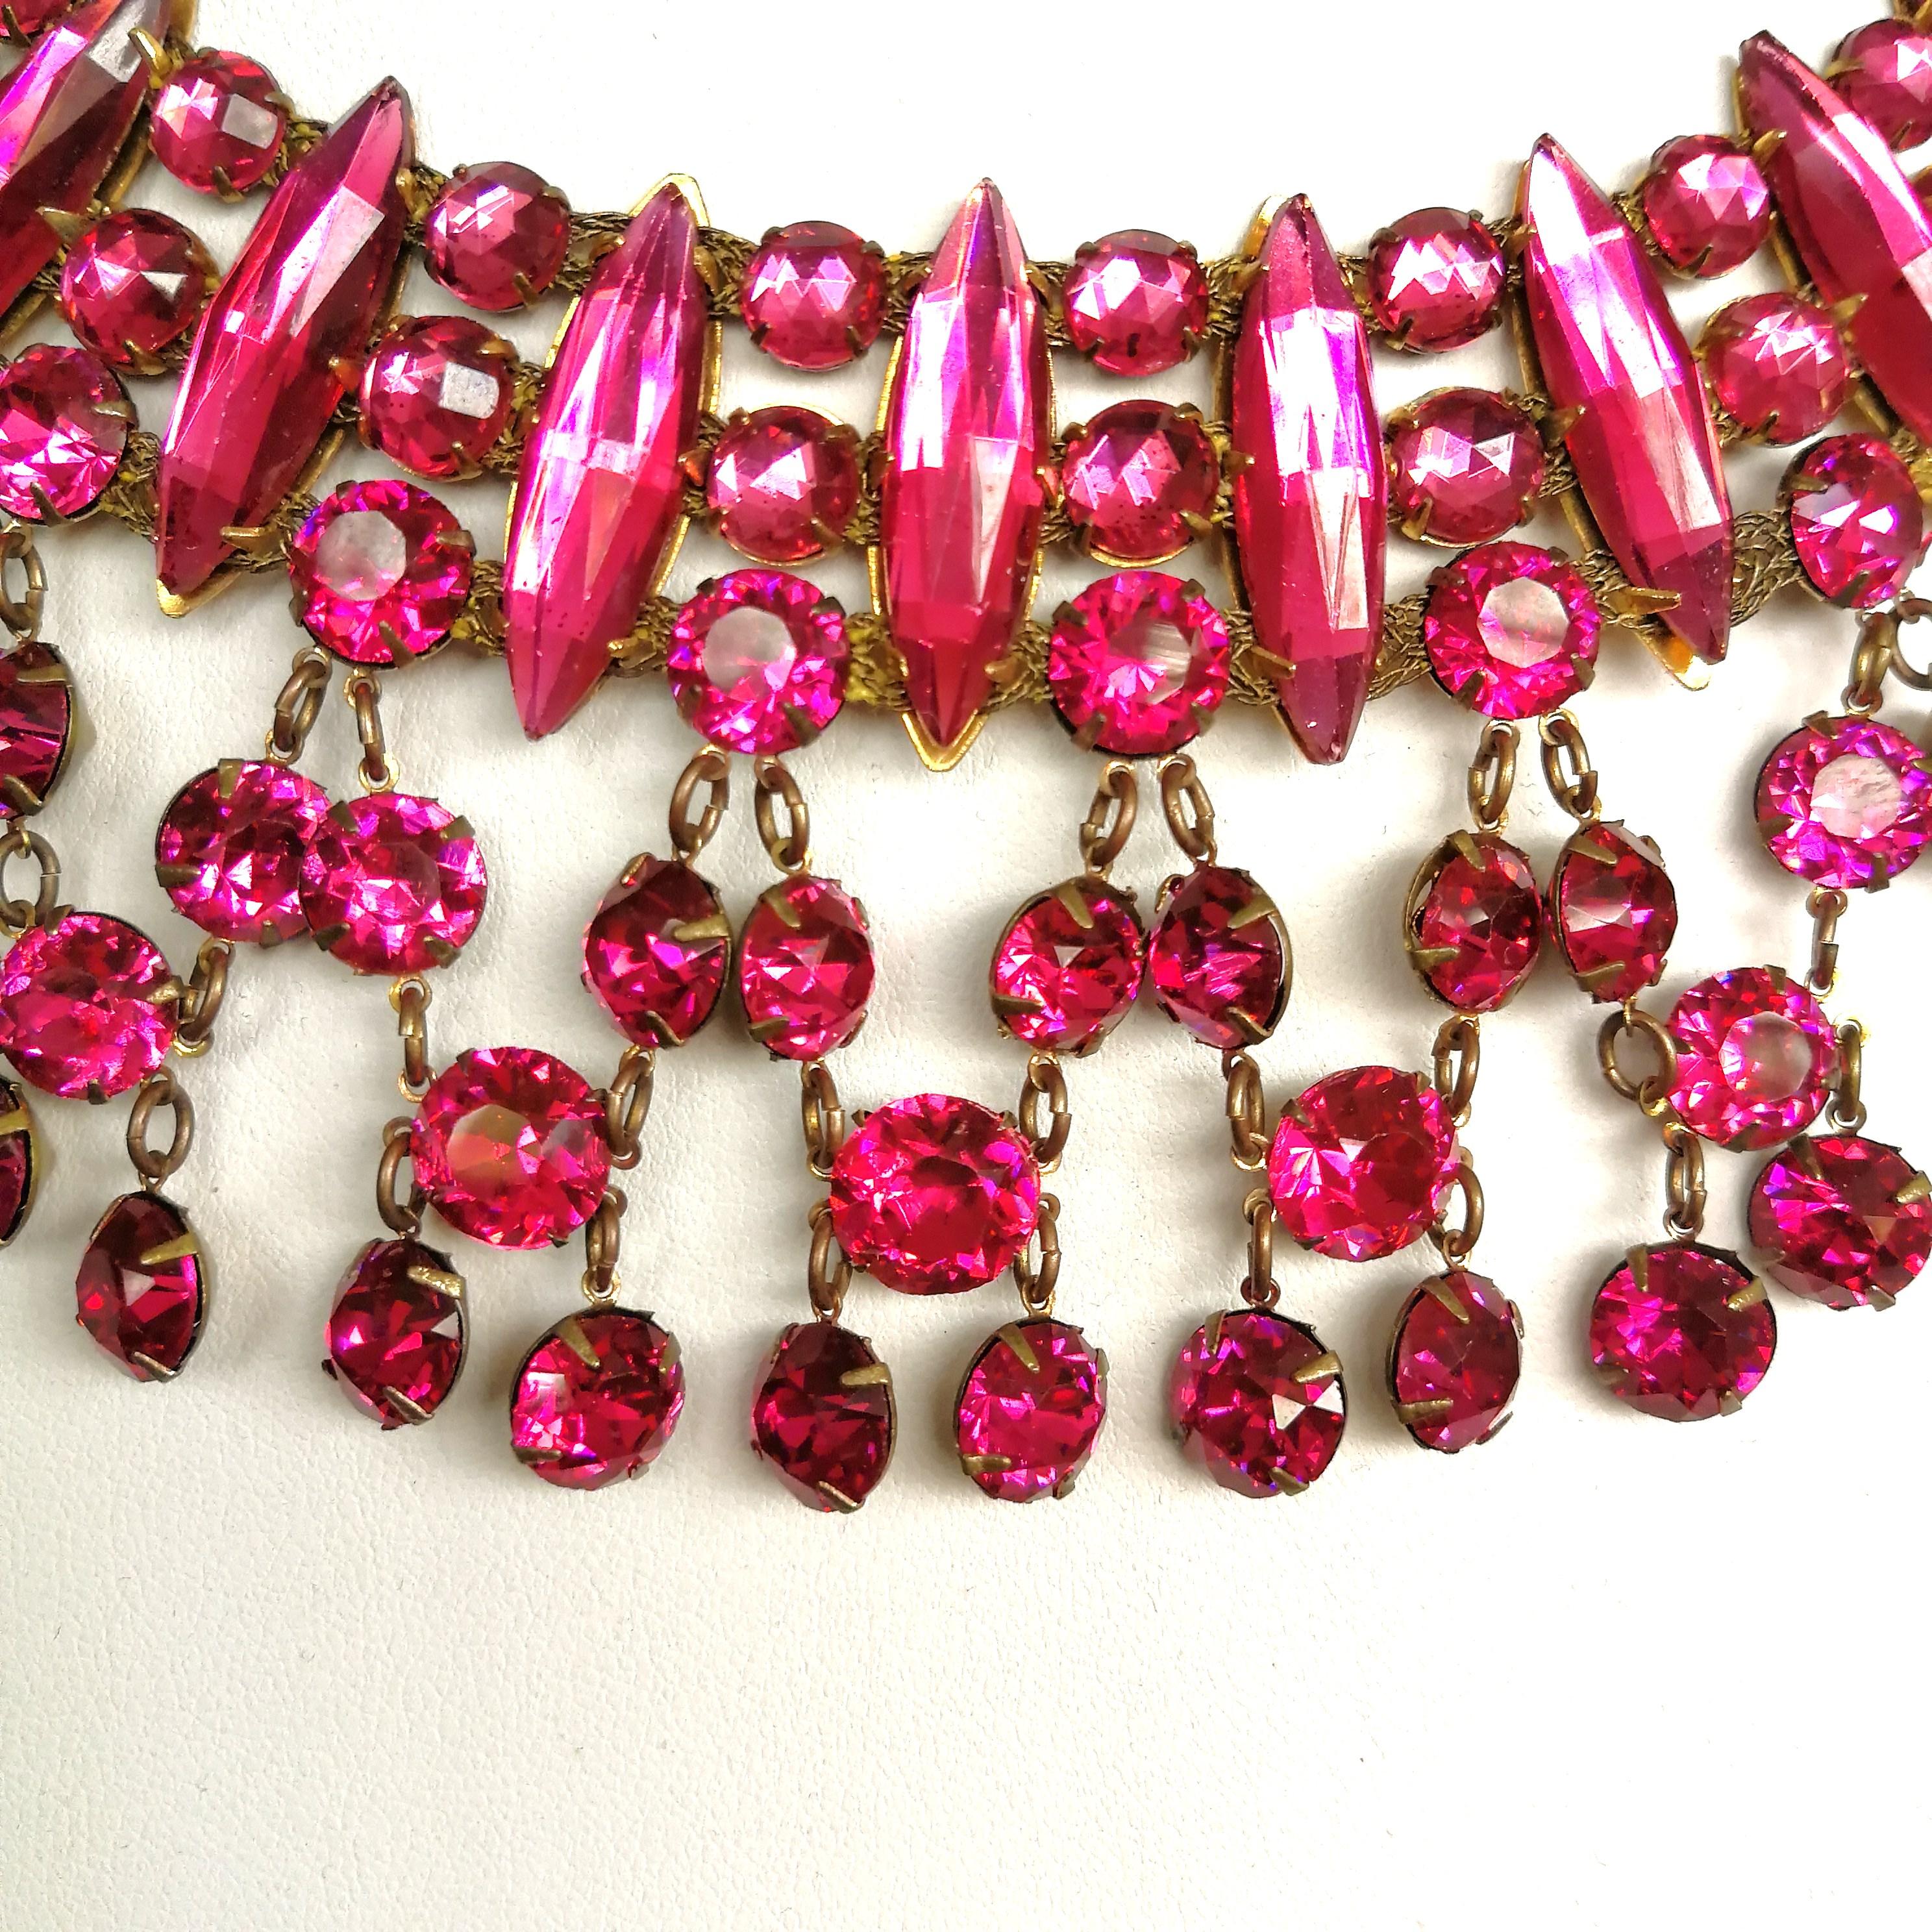 Vibrant cerise cut glass and paste drop necklace, att. Lanvin, France, 1920s In Excellent Condition For Sale In Greyabbey, County Down